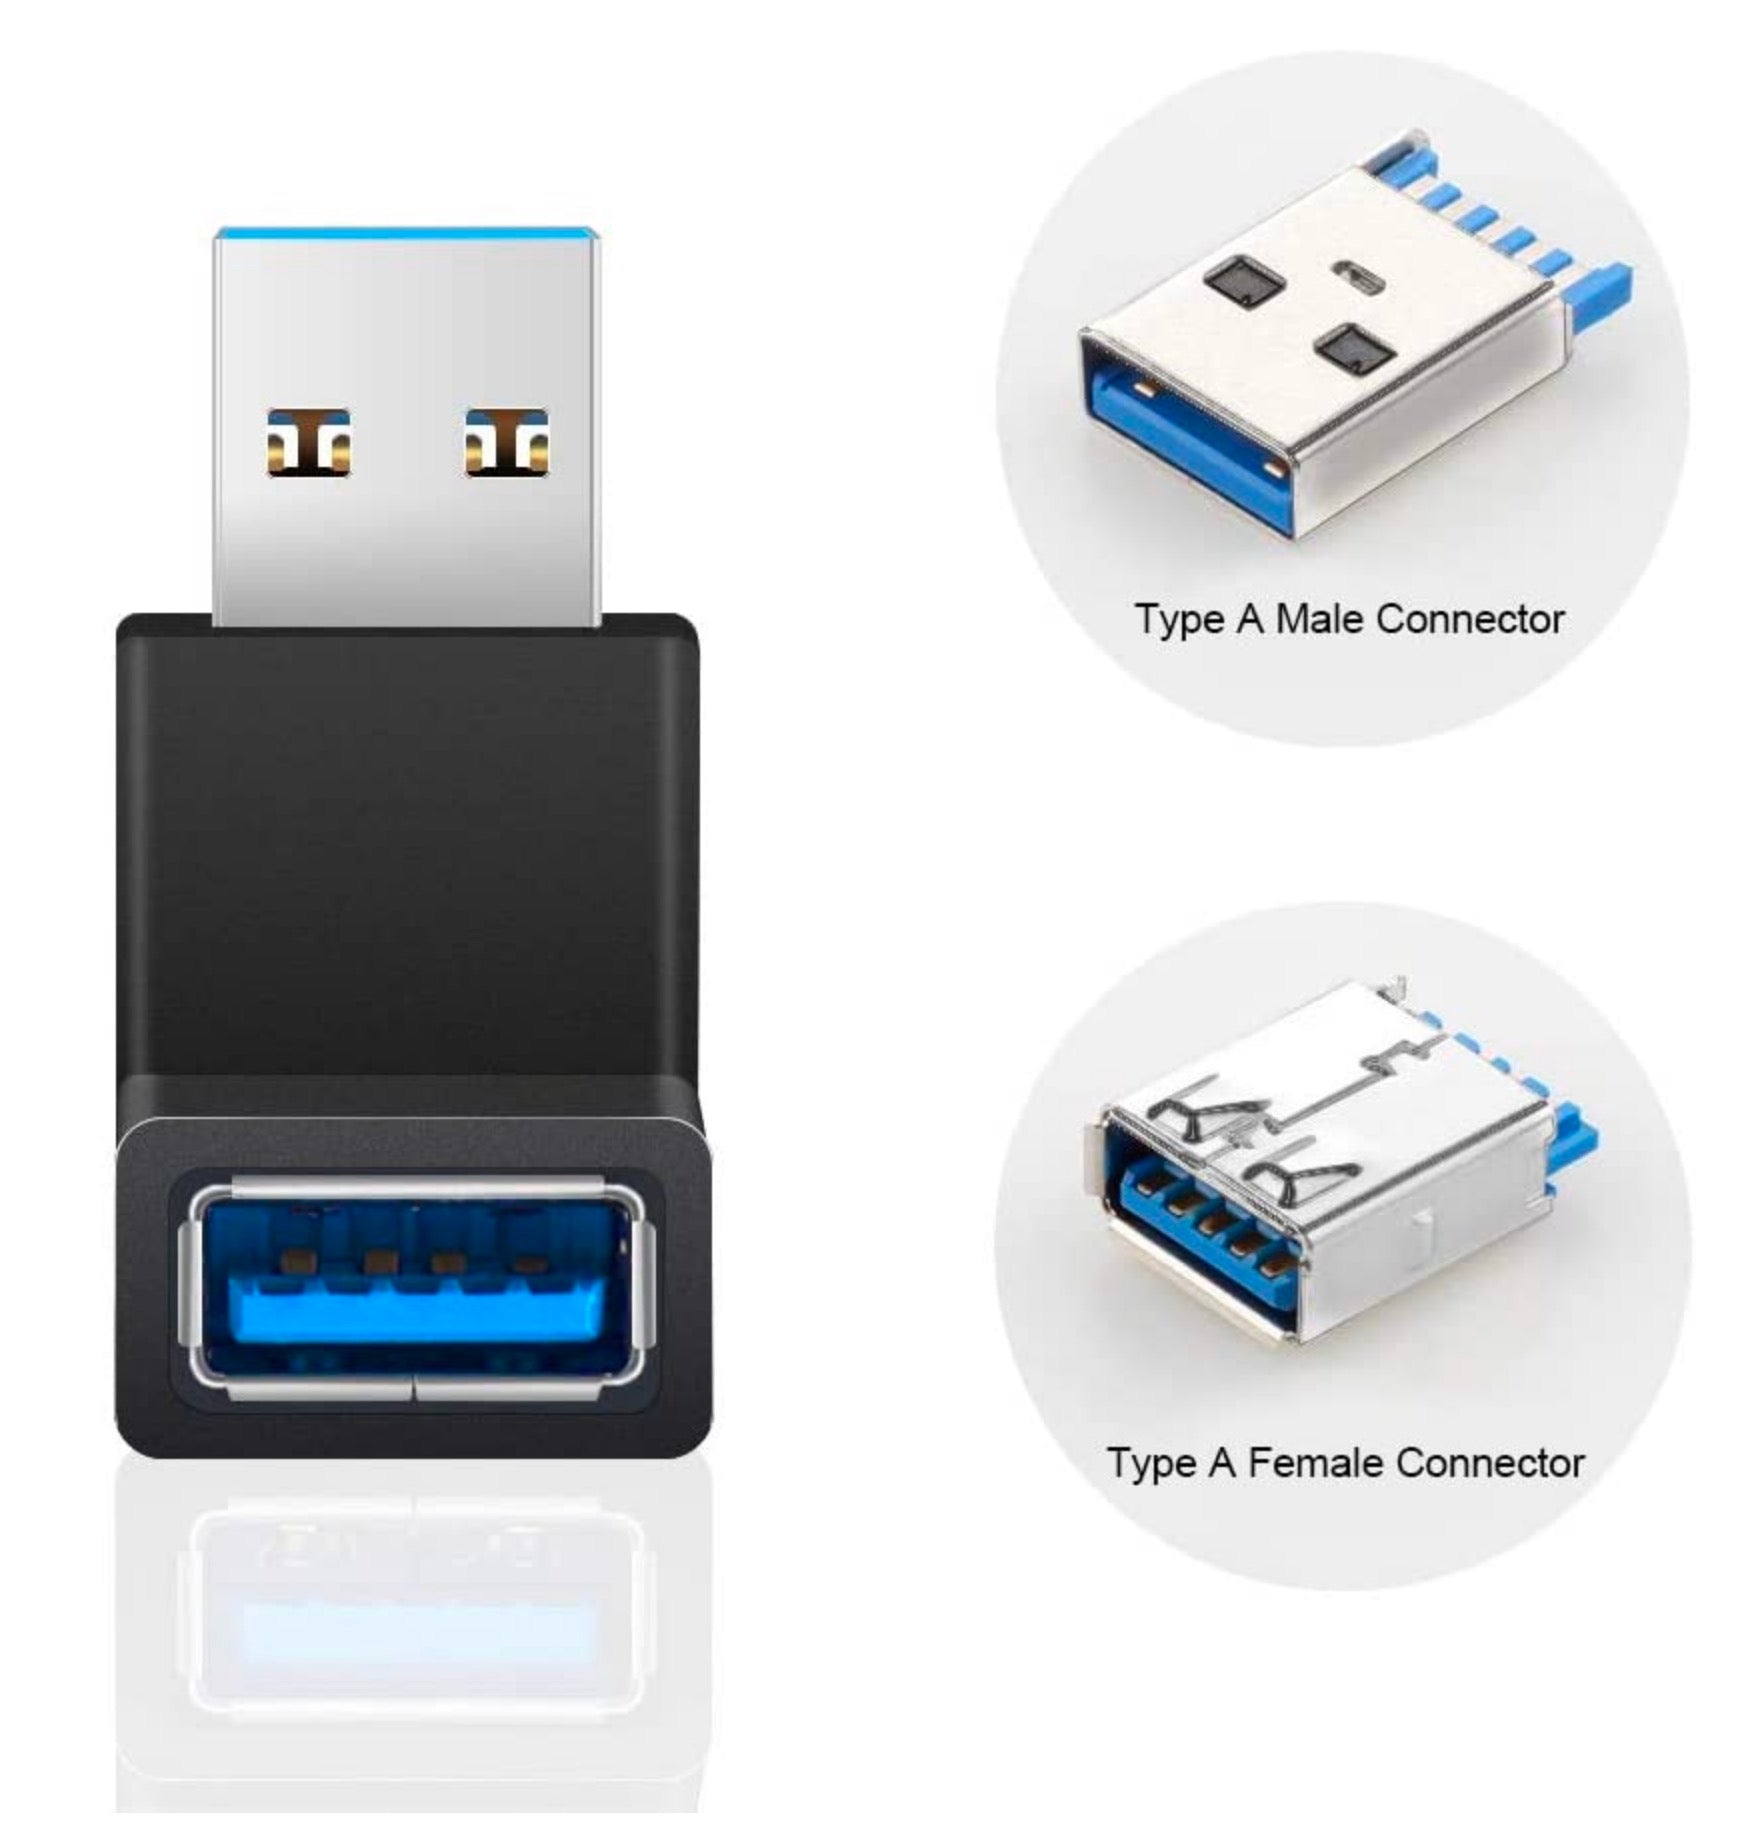 USB 3.0 Type A Angled Male to Female Data Adapter